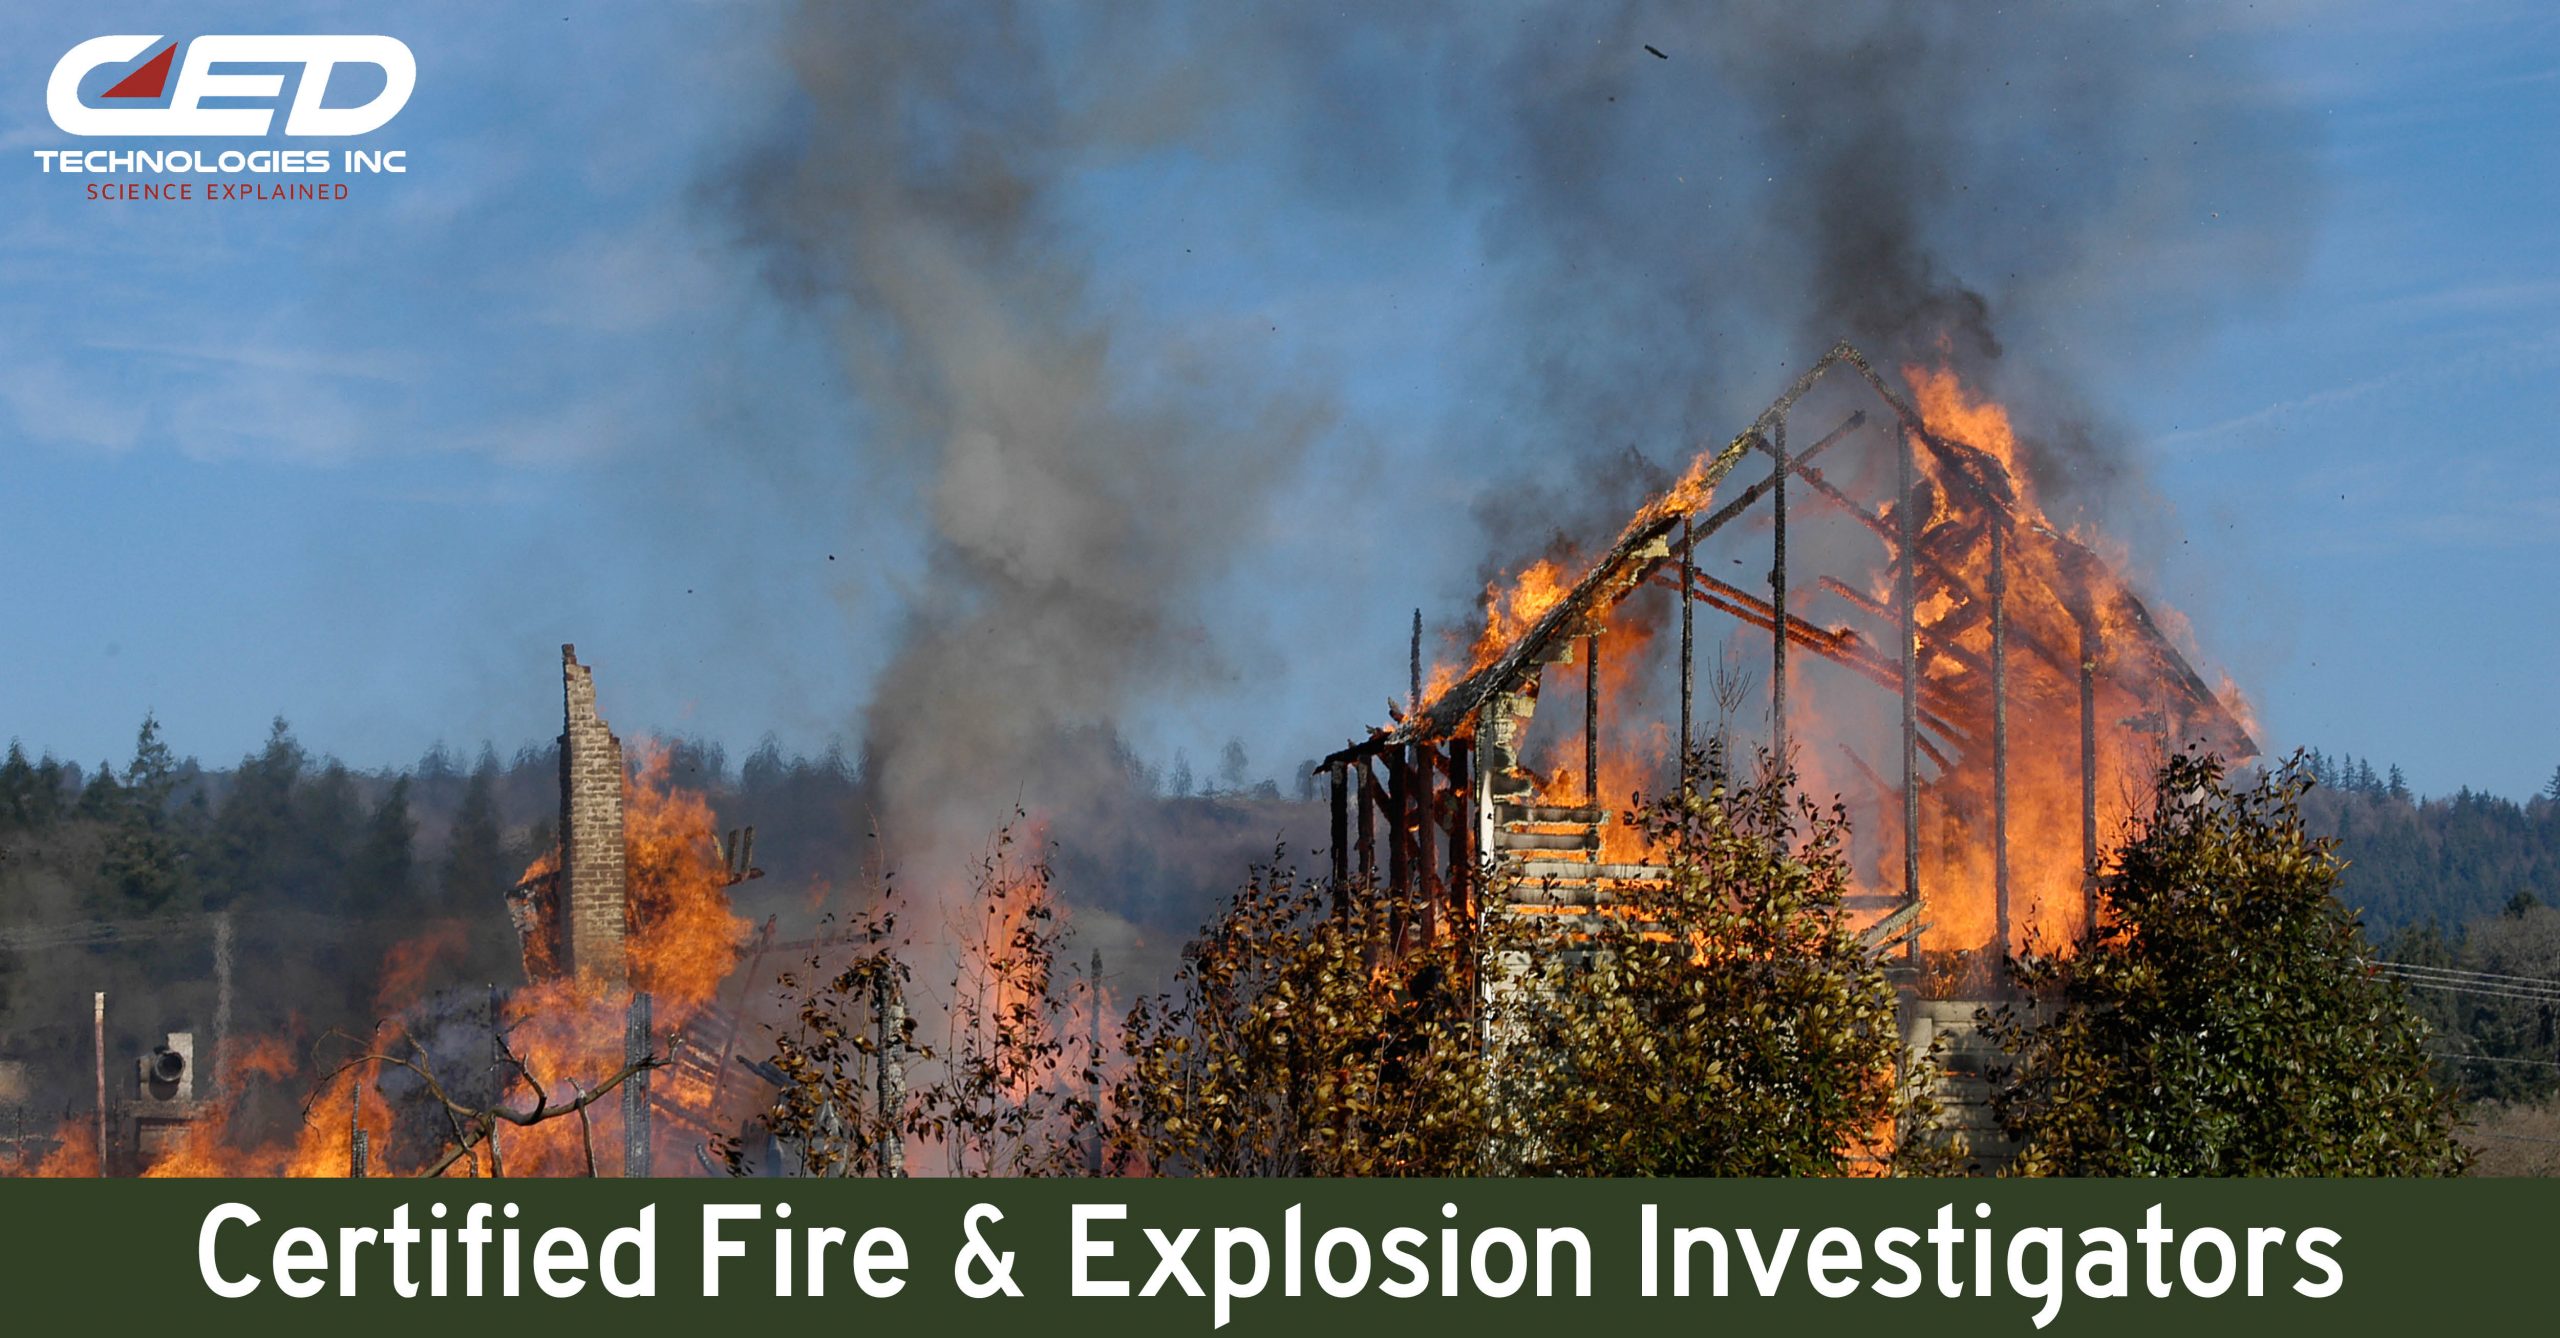 Exceeding Expectations: Certified Fire & Explosion Investigators